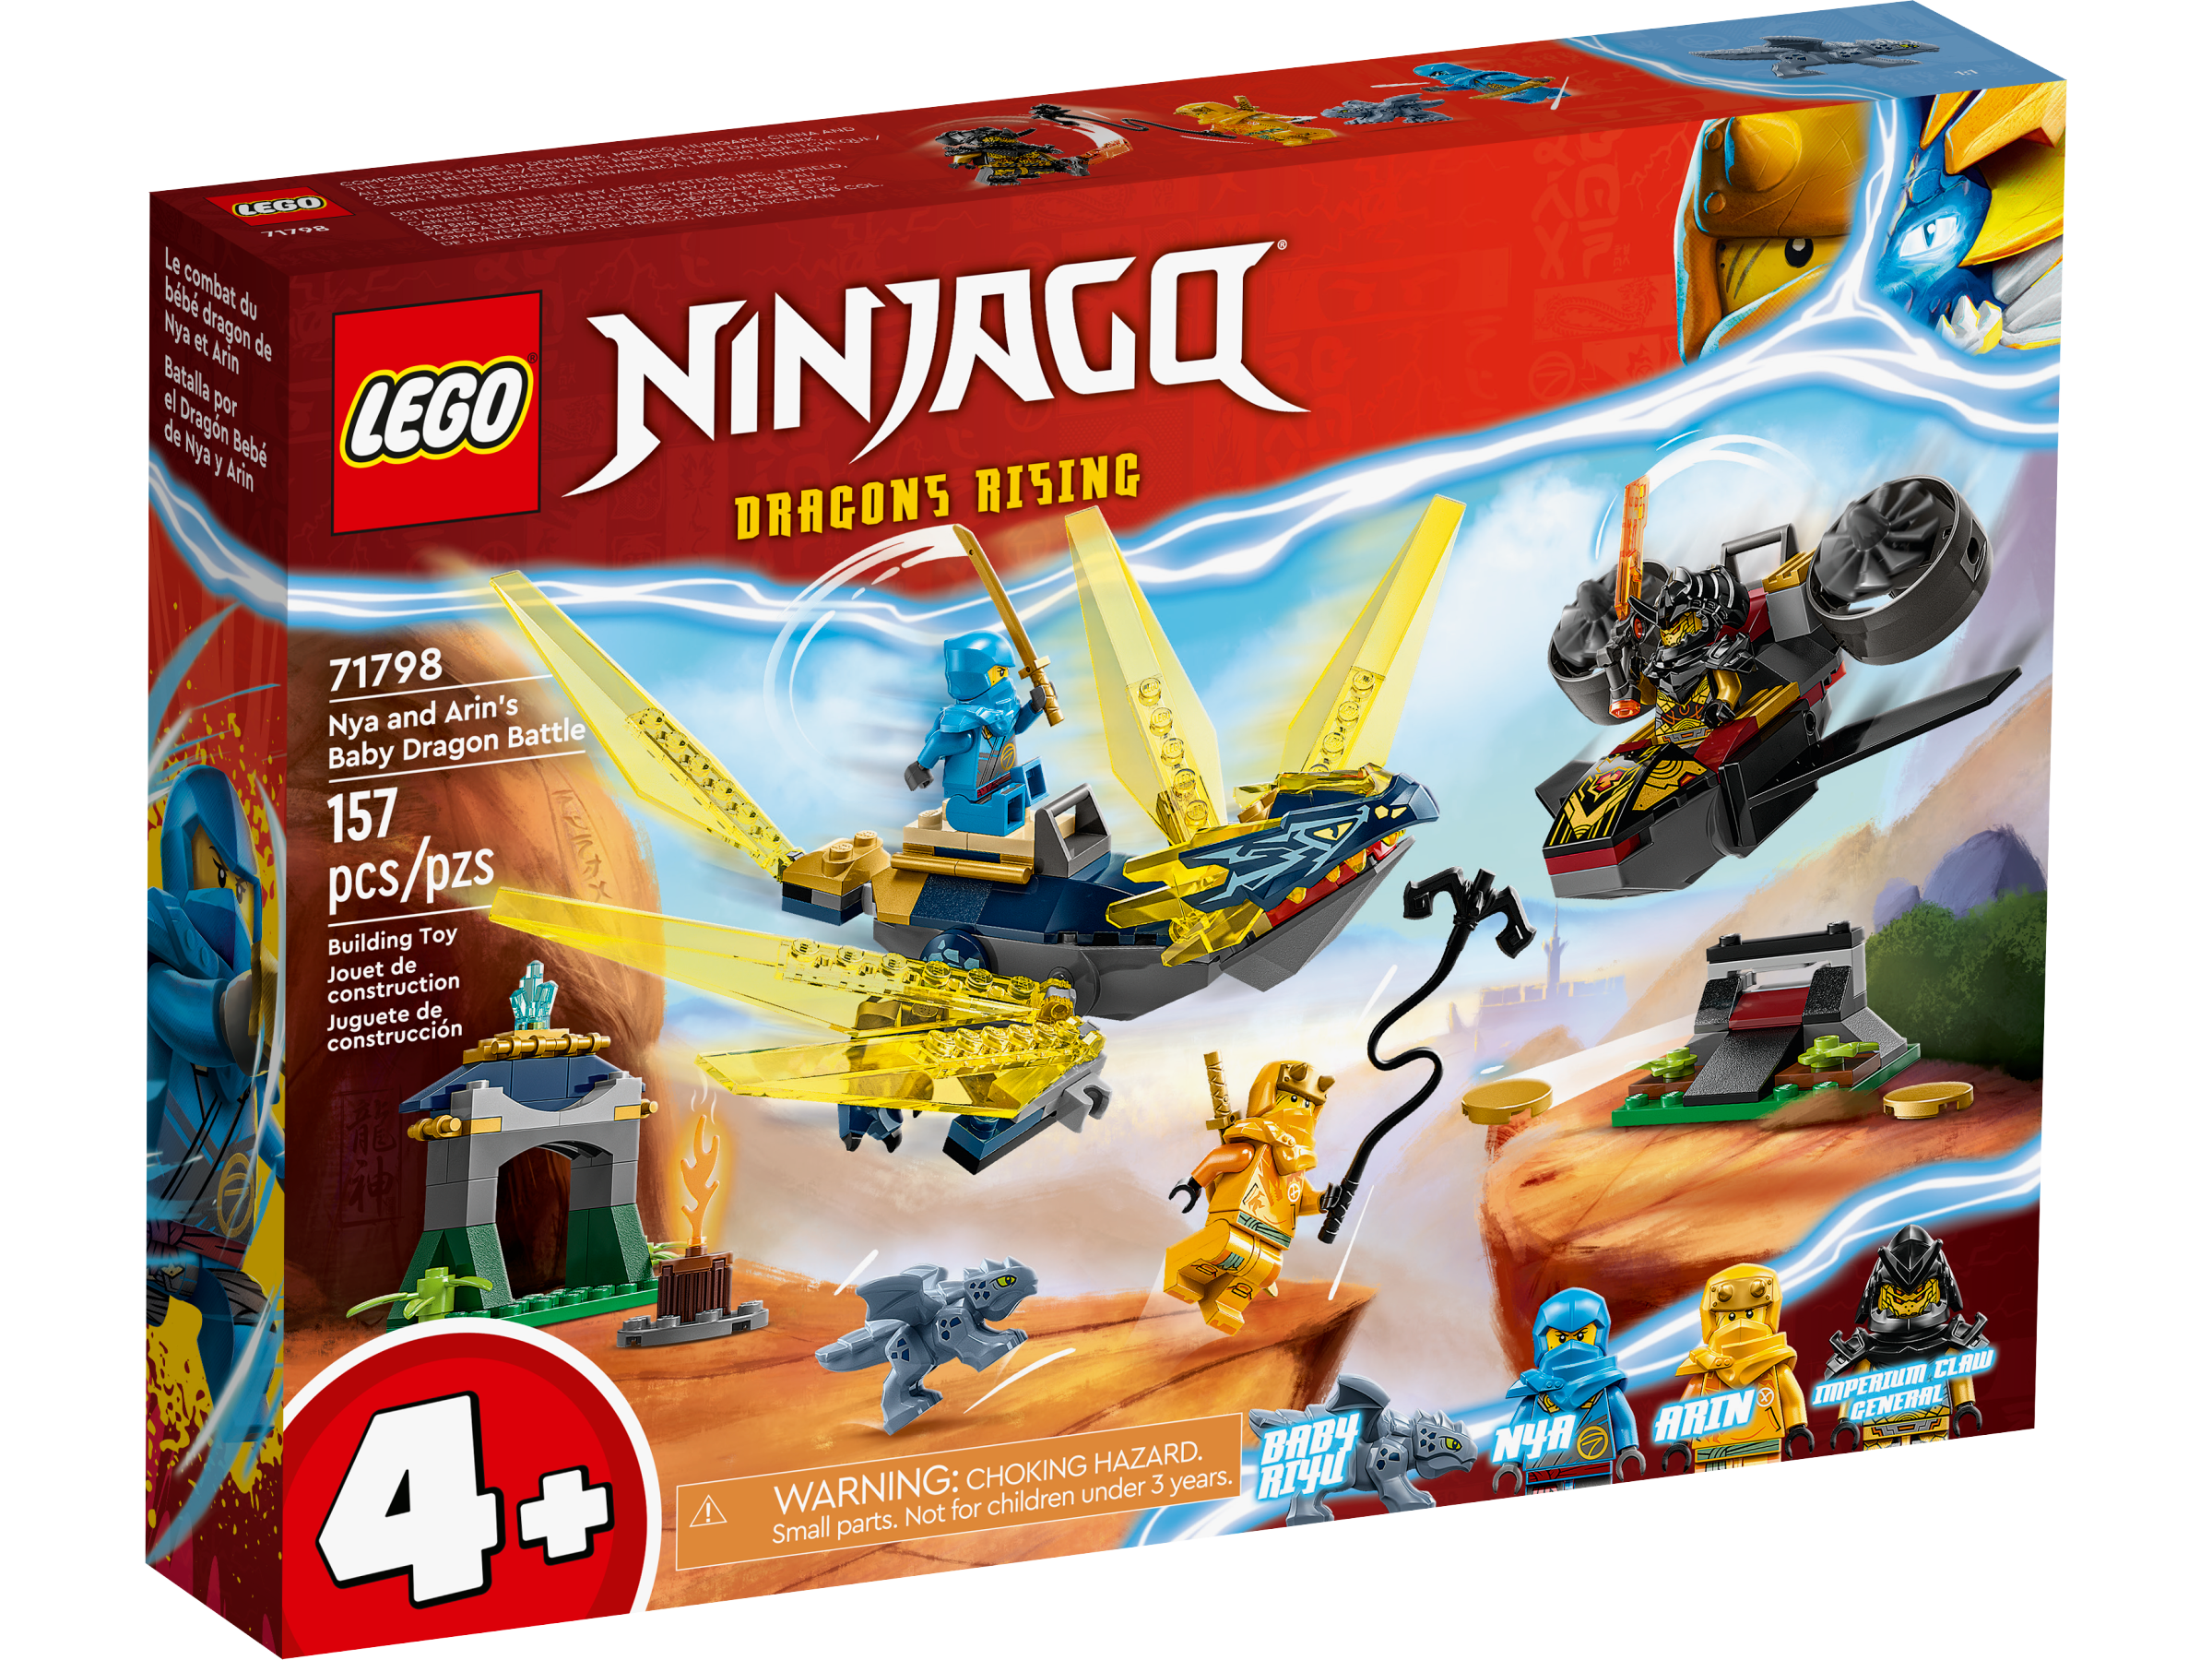 LEGO NINJAGO Dragons Rising welcomes fans with new set